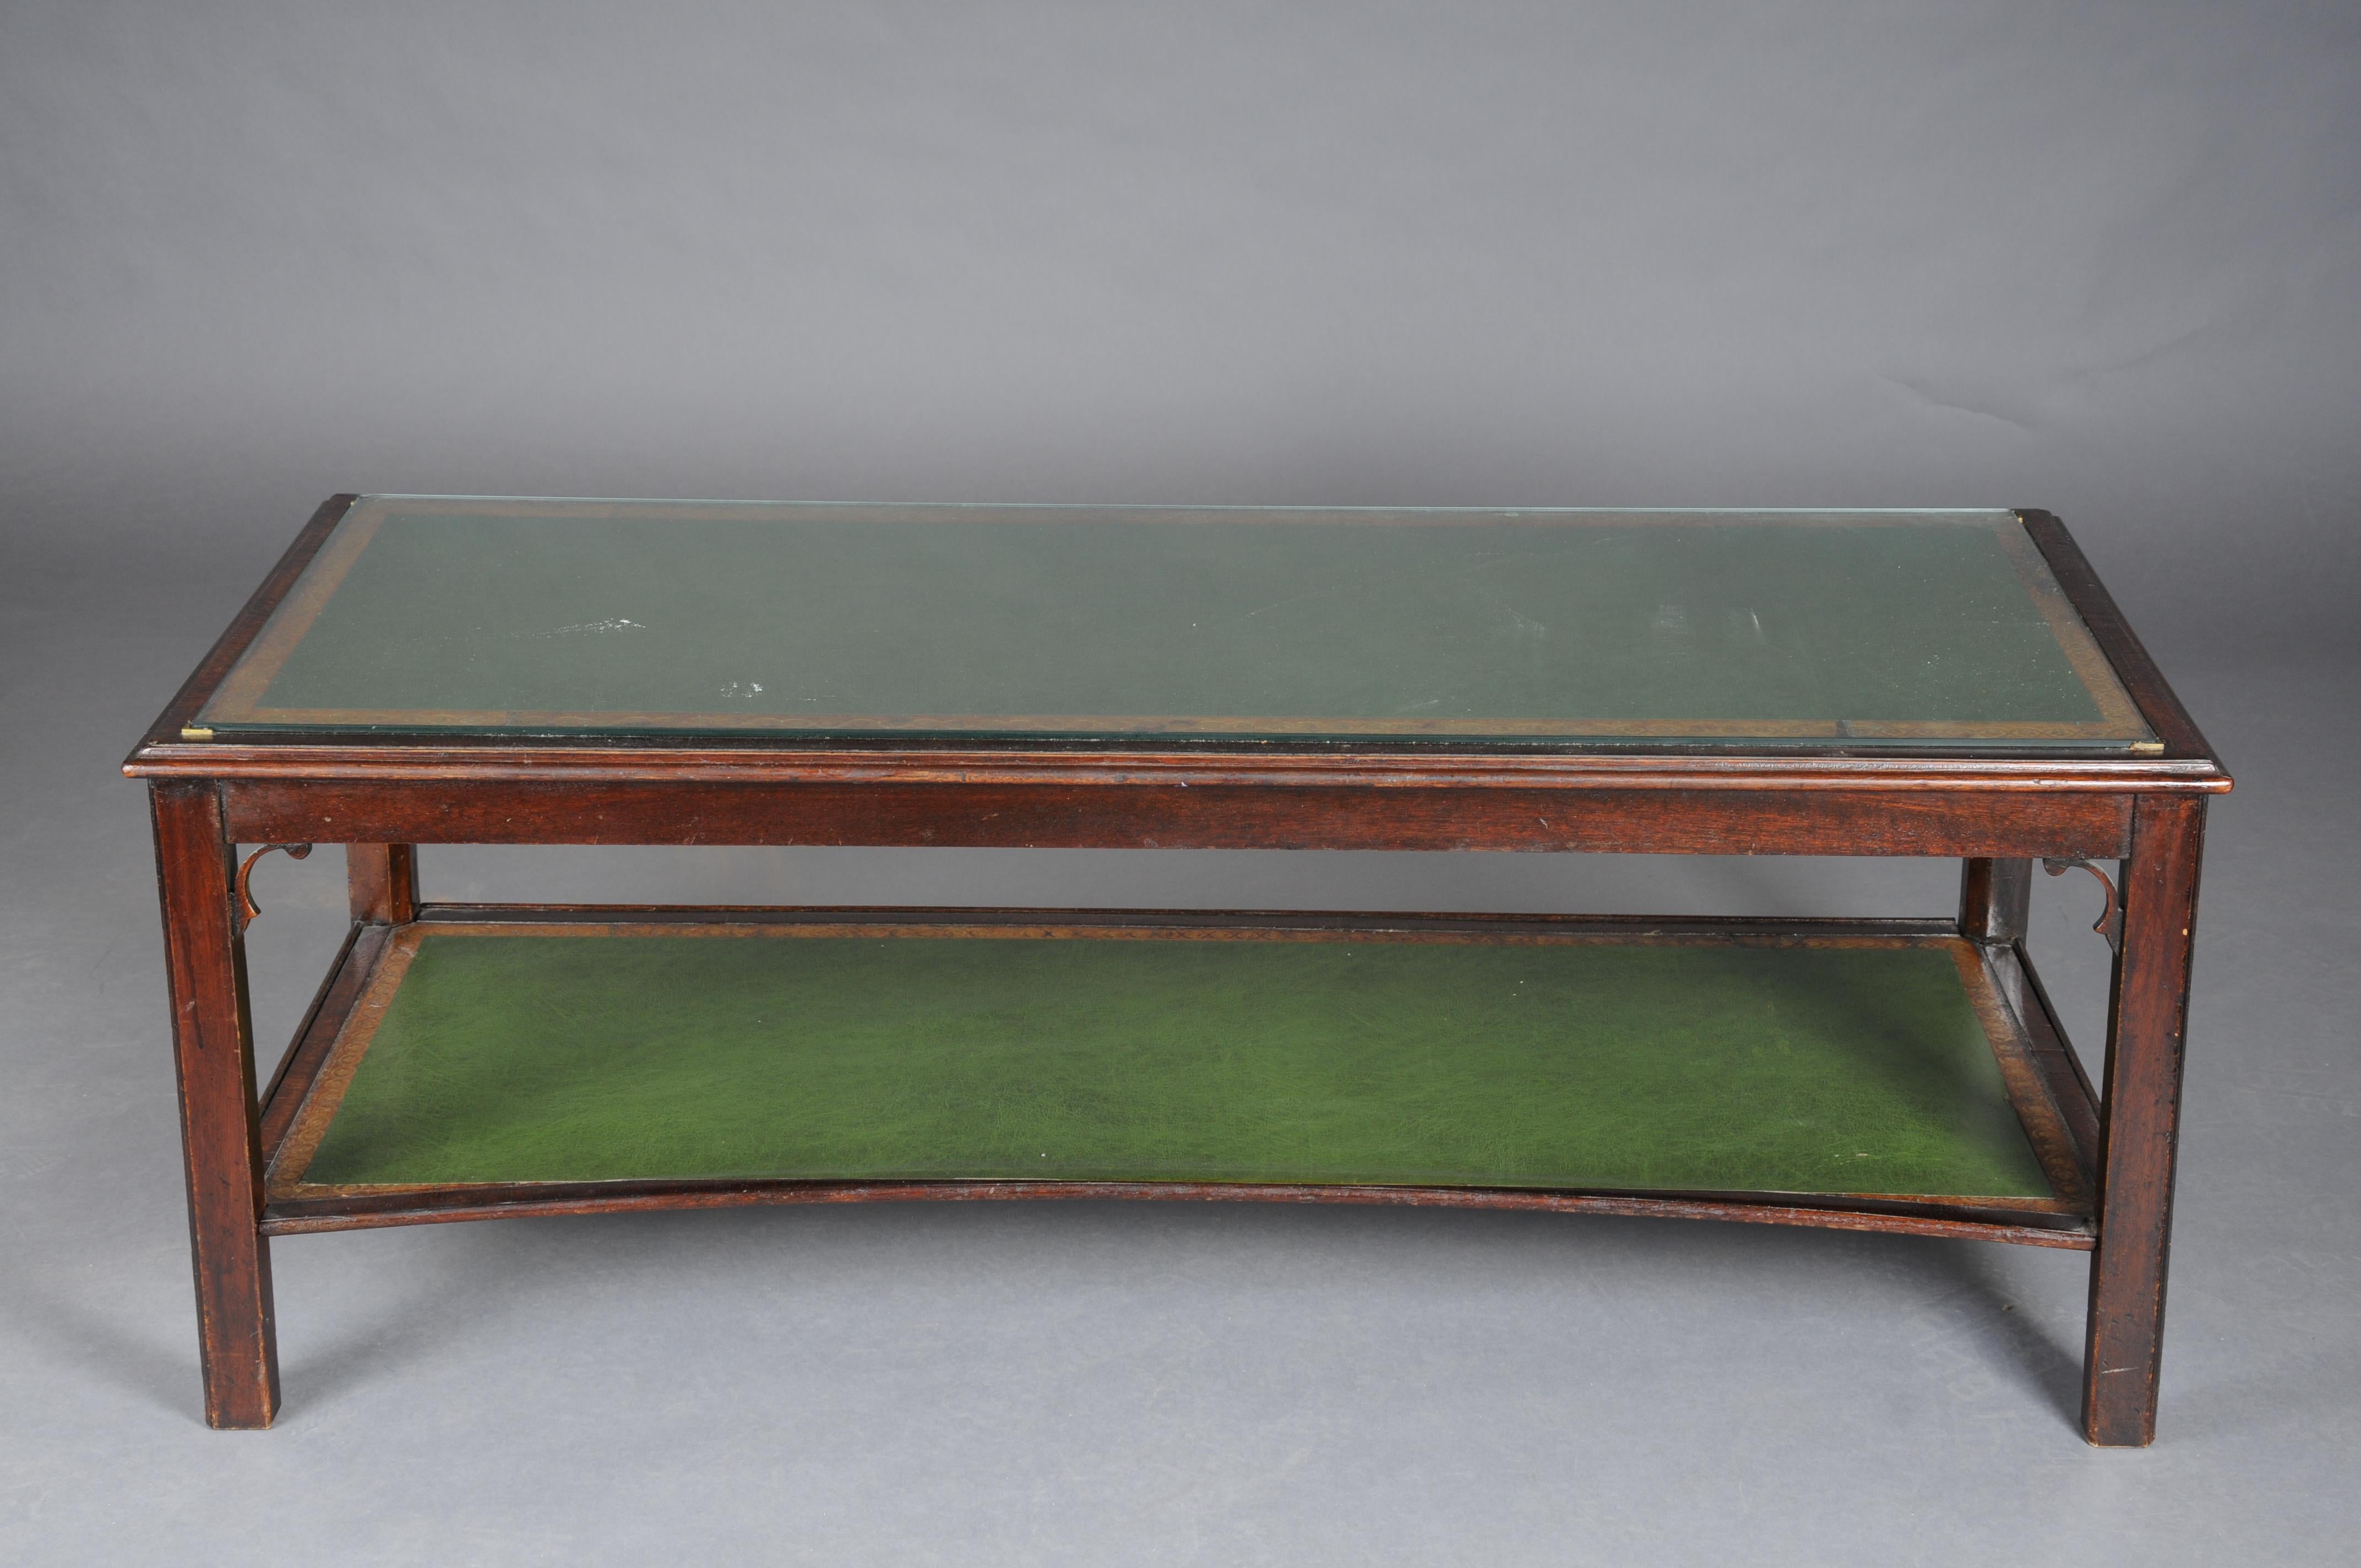 early 20th Century Classicist English Coffee Table Leather Top

Body made of movable wood. Partly furnished in mahogany on two levels. Cover plate with a glass plate.
Covered in green leather.

